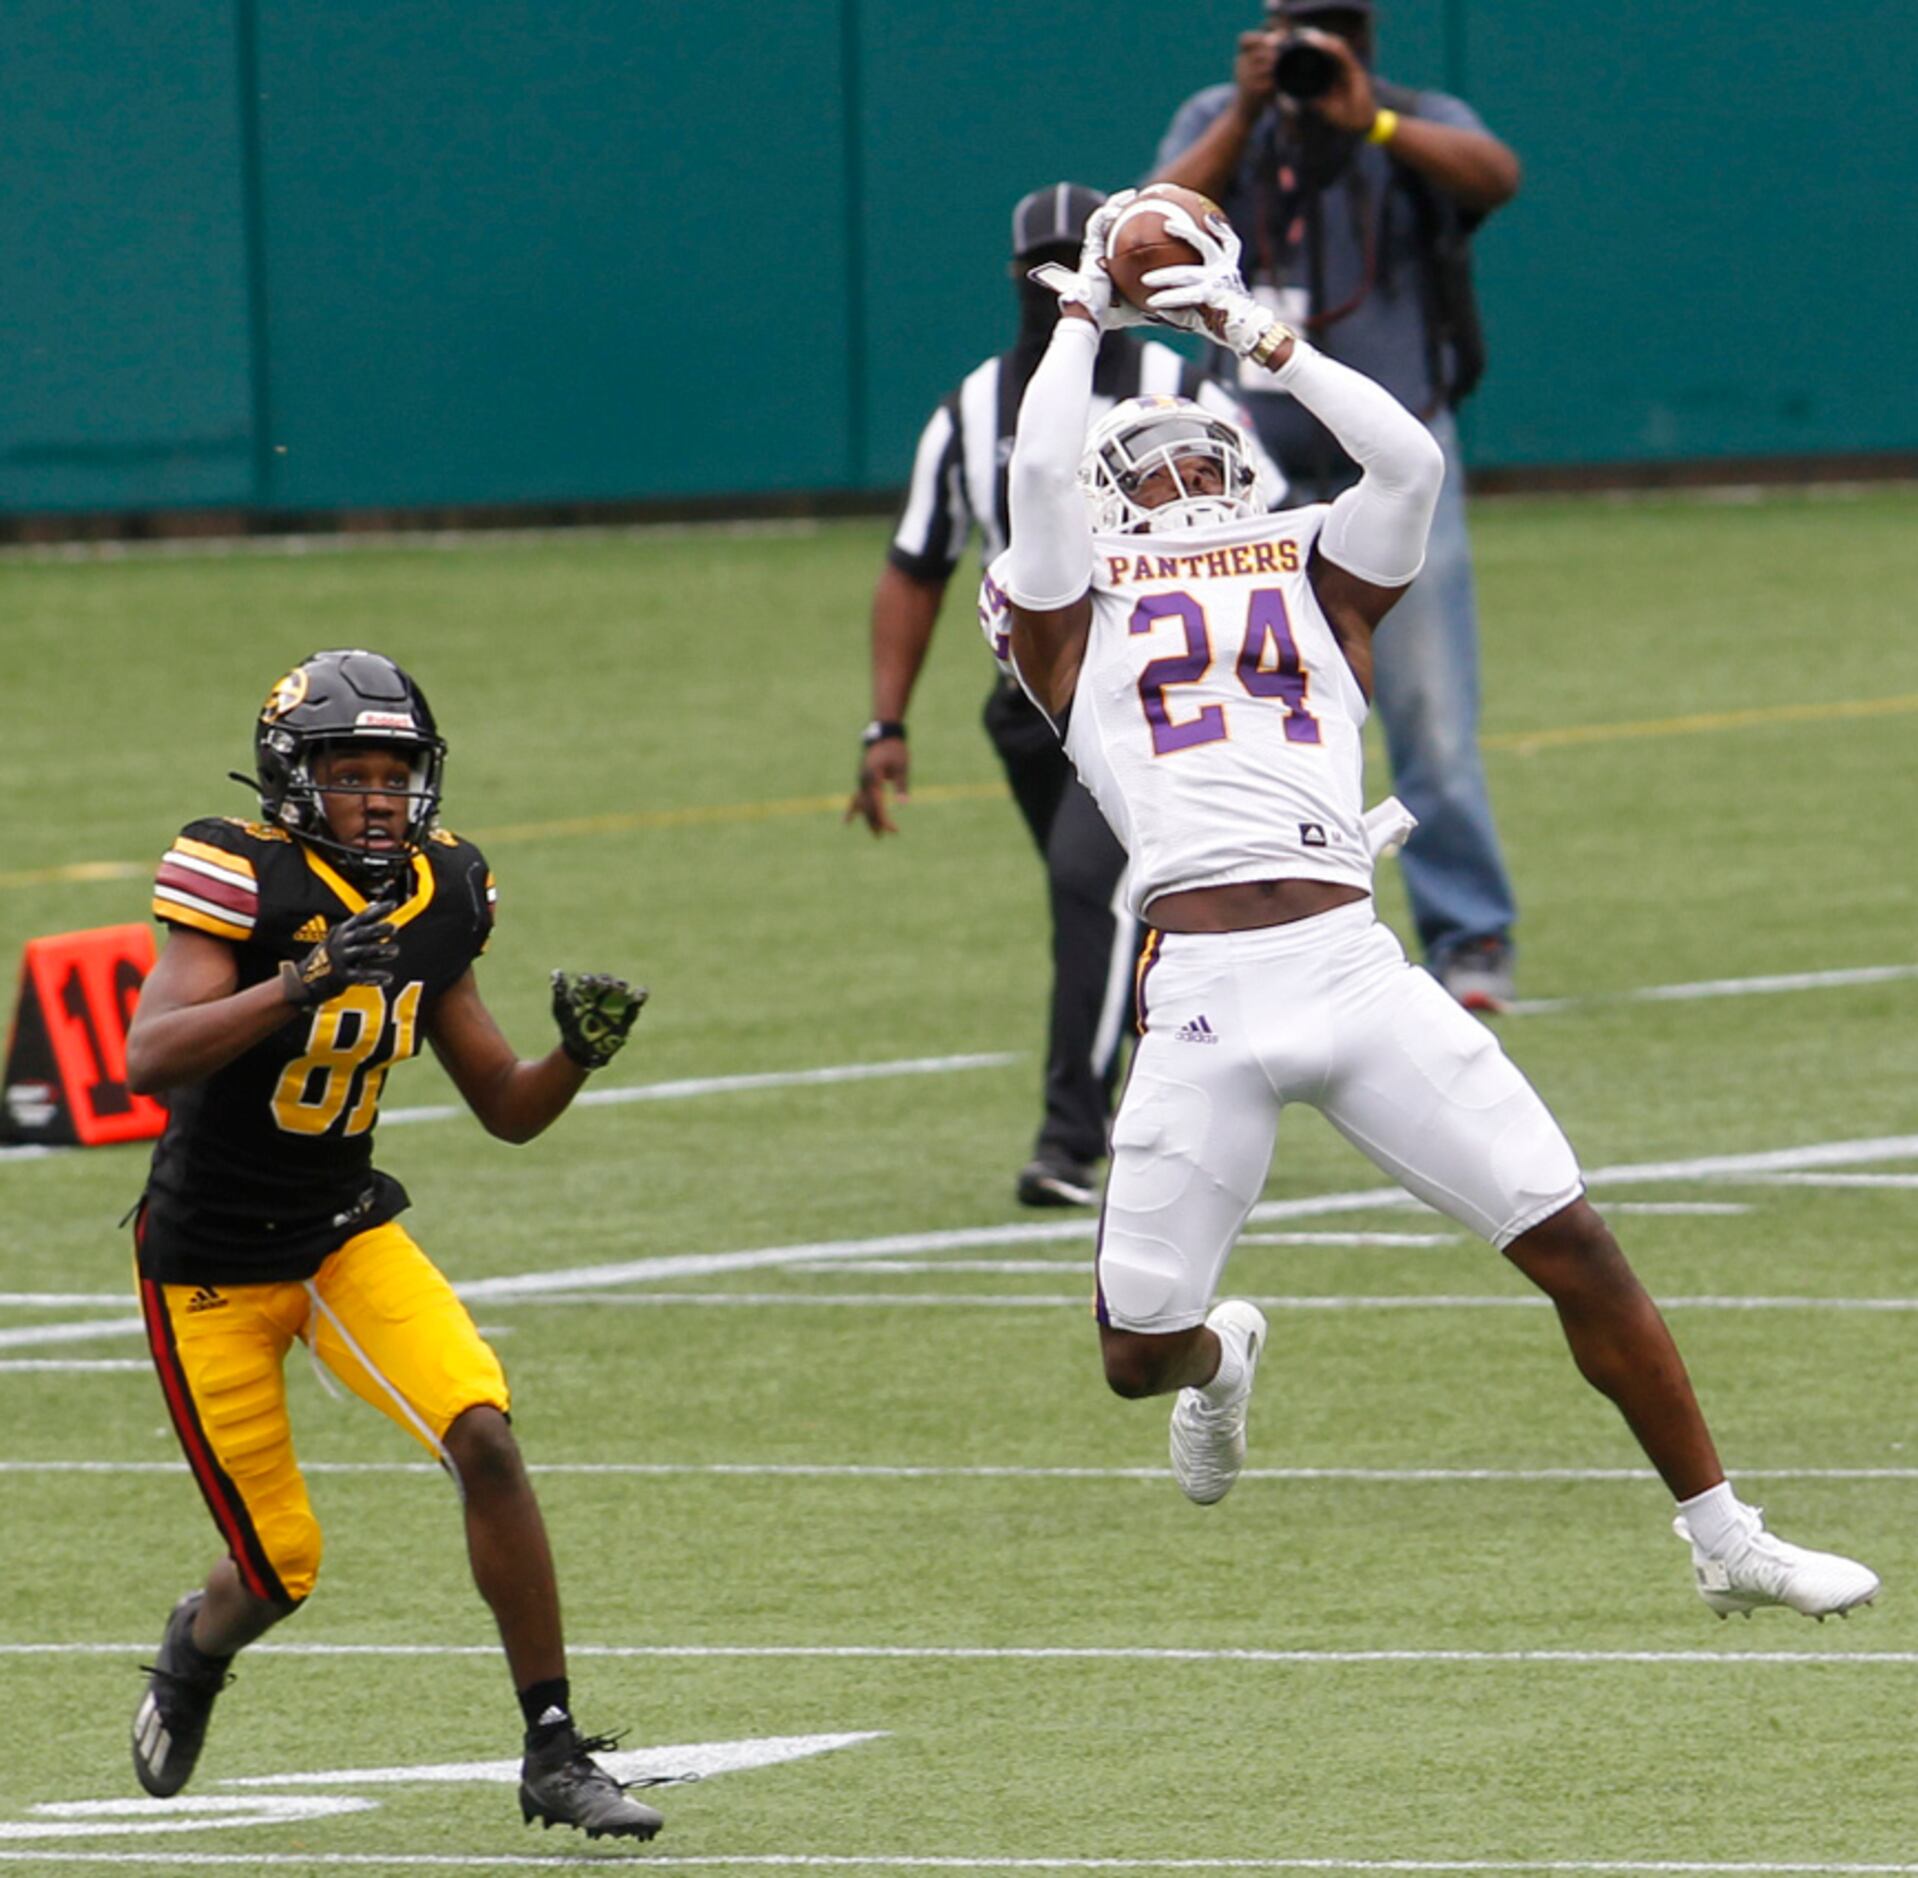 Prairie View A&M defender Reginald Stubblefield (24) leaps to intercept a pass intended for...